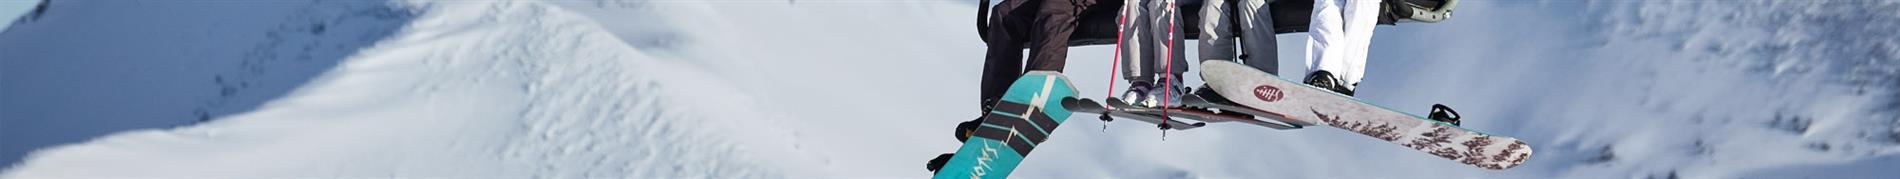 Salomon Women's skis, snowboards, and accessories for everything snow. 